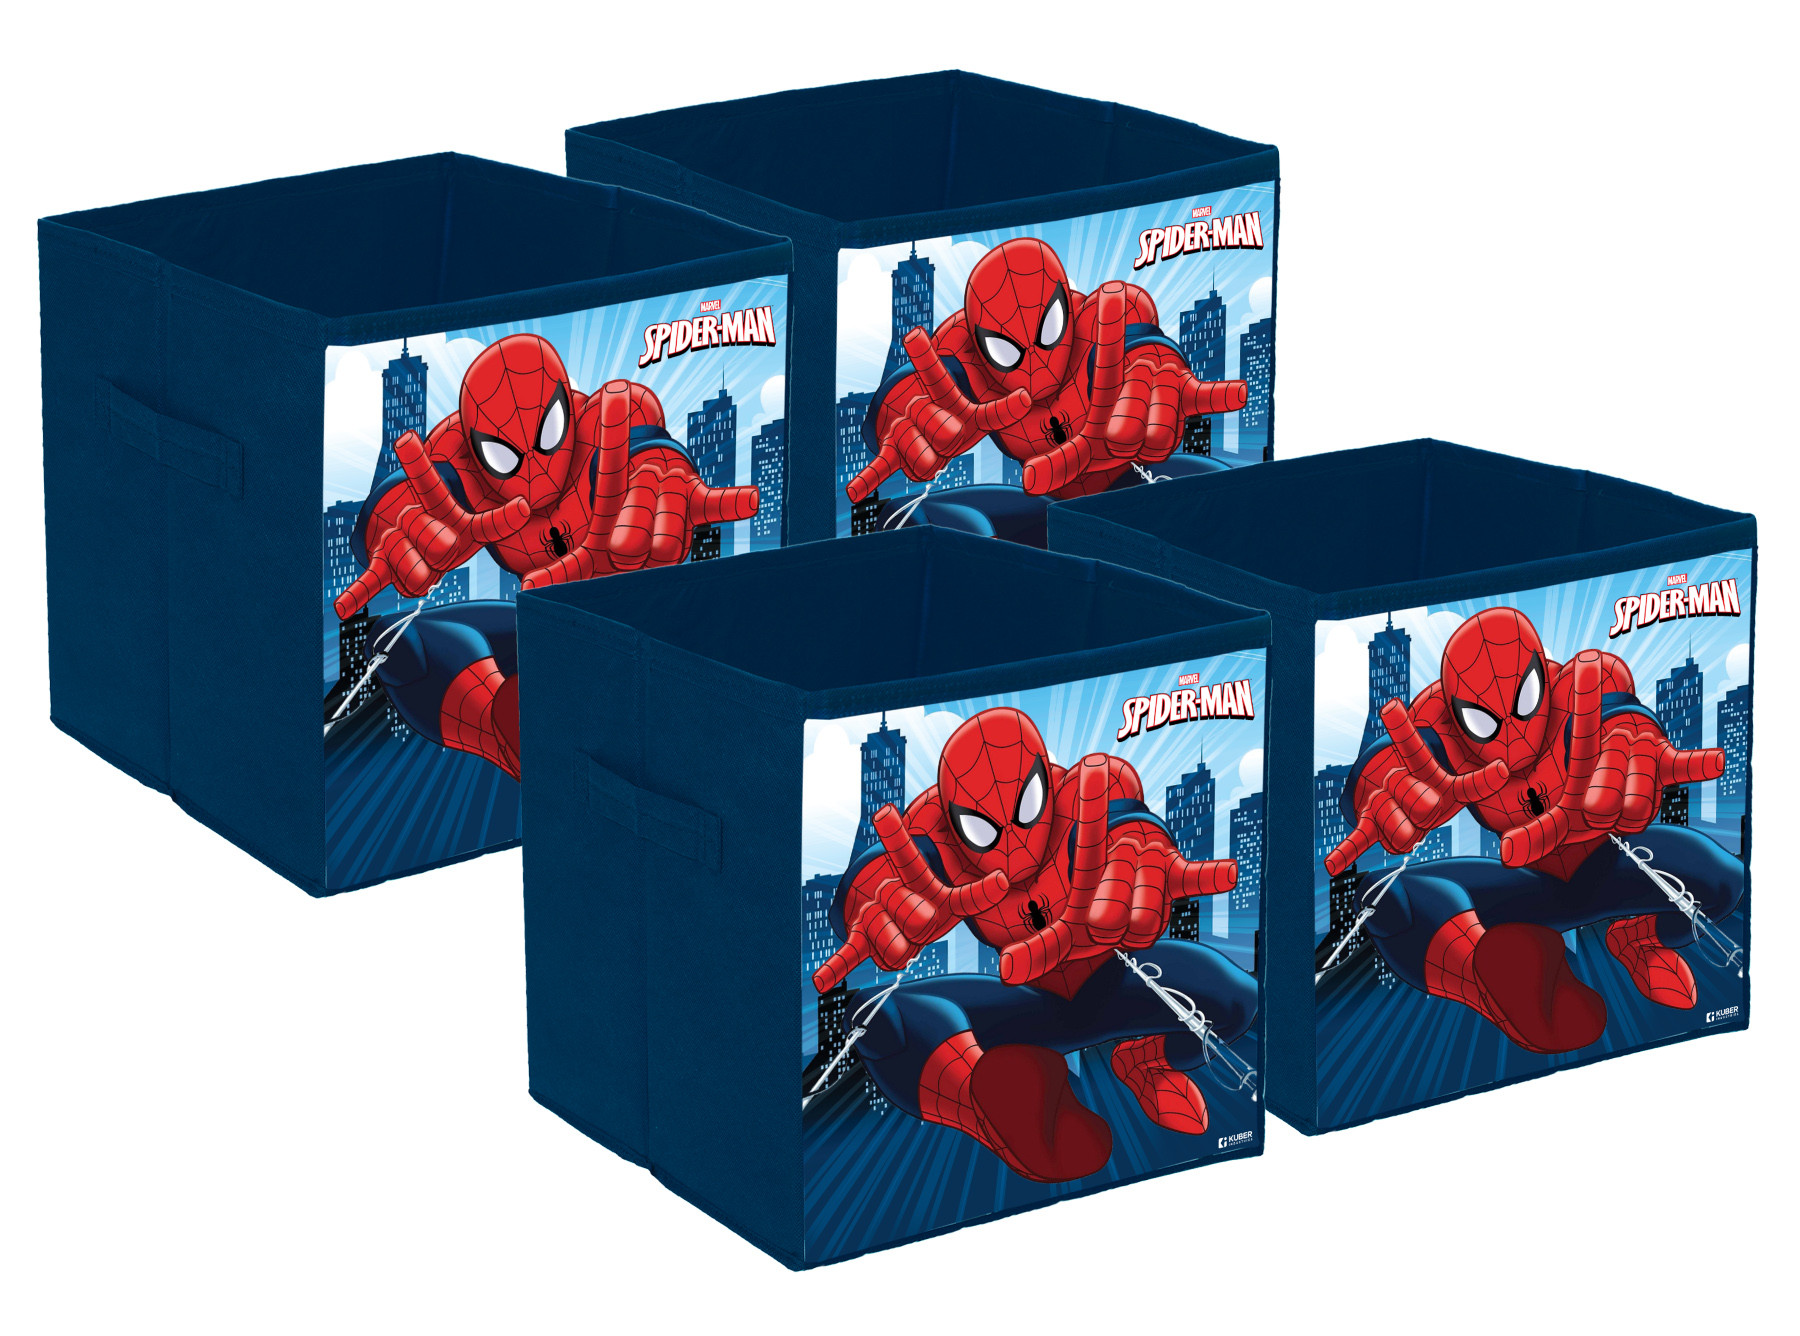 Kuber Industries Marvel Spiderman Print Durable & Collapsible Square Storage Box|Clothes Organizer With Handle,.(Navy Blue)